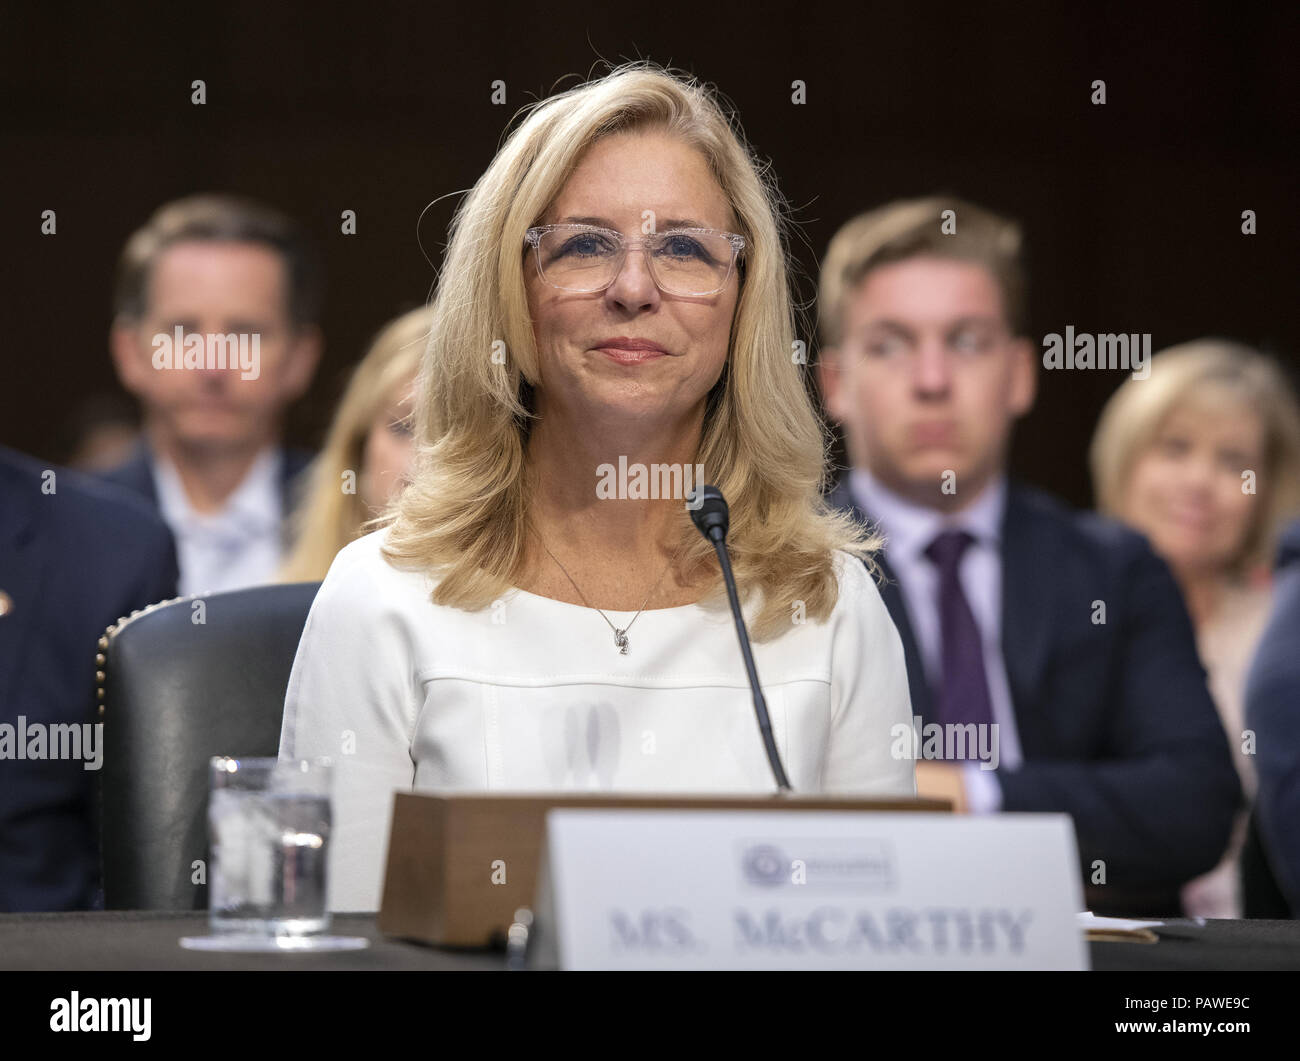 July 25, 2018 - Washington, District of Columbia, United States of America - Ellen E. McCarthy testifies before the United States Senate Select Committee on Intelligence on her nomination to be an Assistant Secretary of State (Intelligence and Research), on Capitol Hill in Washington, DC on Wednesday, July 25, 2018..Credit: Ron Sachs / CNP (Credit Image: © Ron Sachs/CNP via ZUMA Wire) Stock Photo